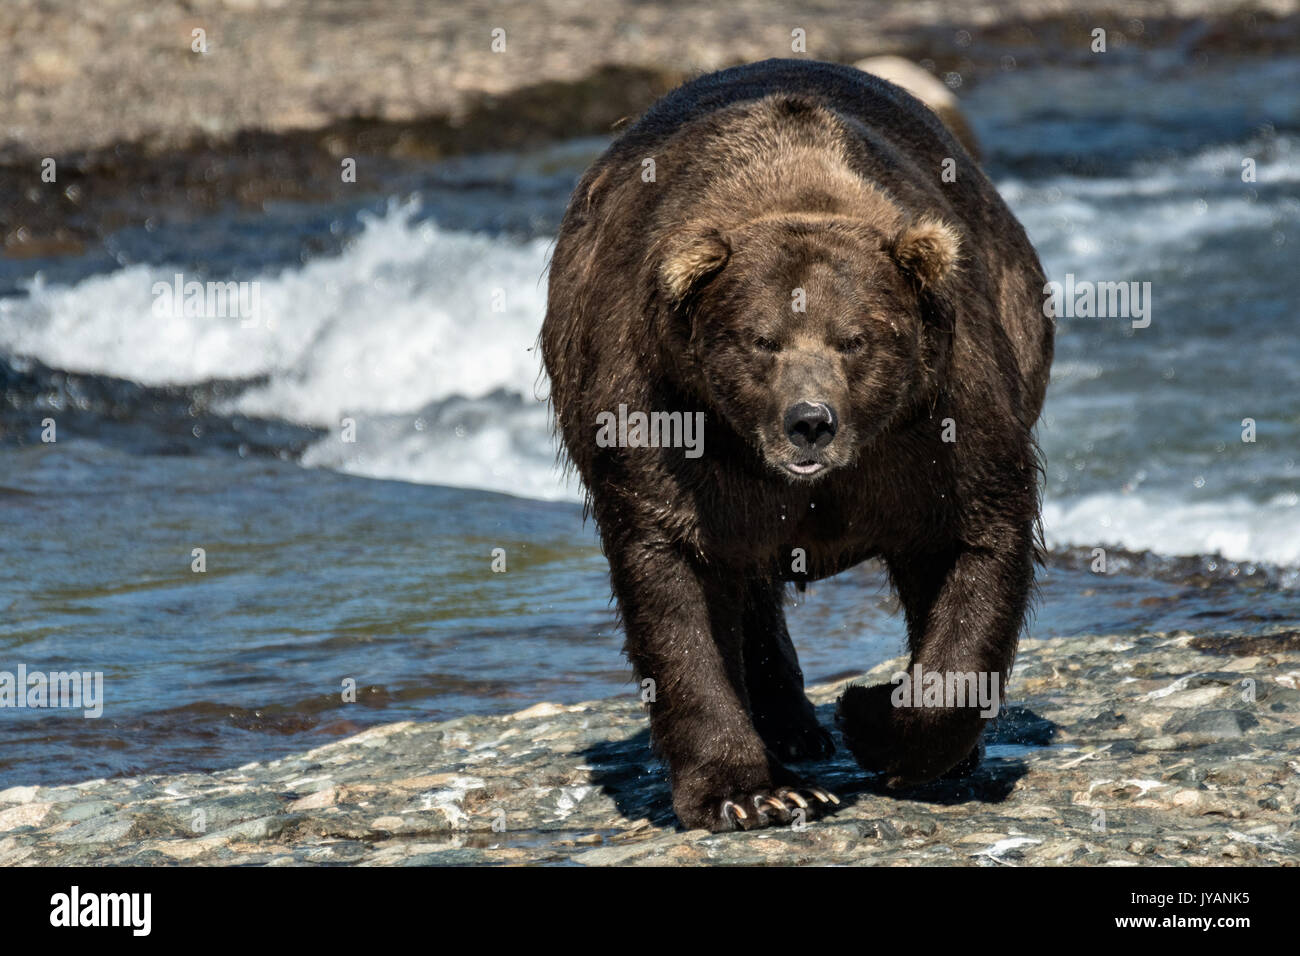 The alpha Grizzly bear boar known as Chops fishing in the upper McNeil River falls at the McNeil River State Game Sanctuary on the Kenai Peninsula, Alaska. The remote site is accessed only with a special permit and is the world’s largest seasonal population of brown bears. Stock Photo